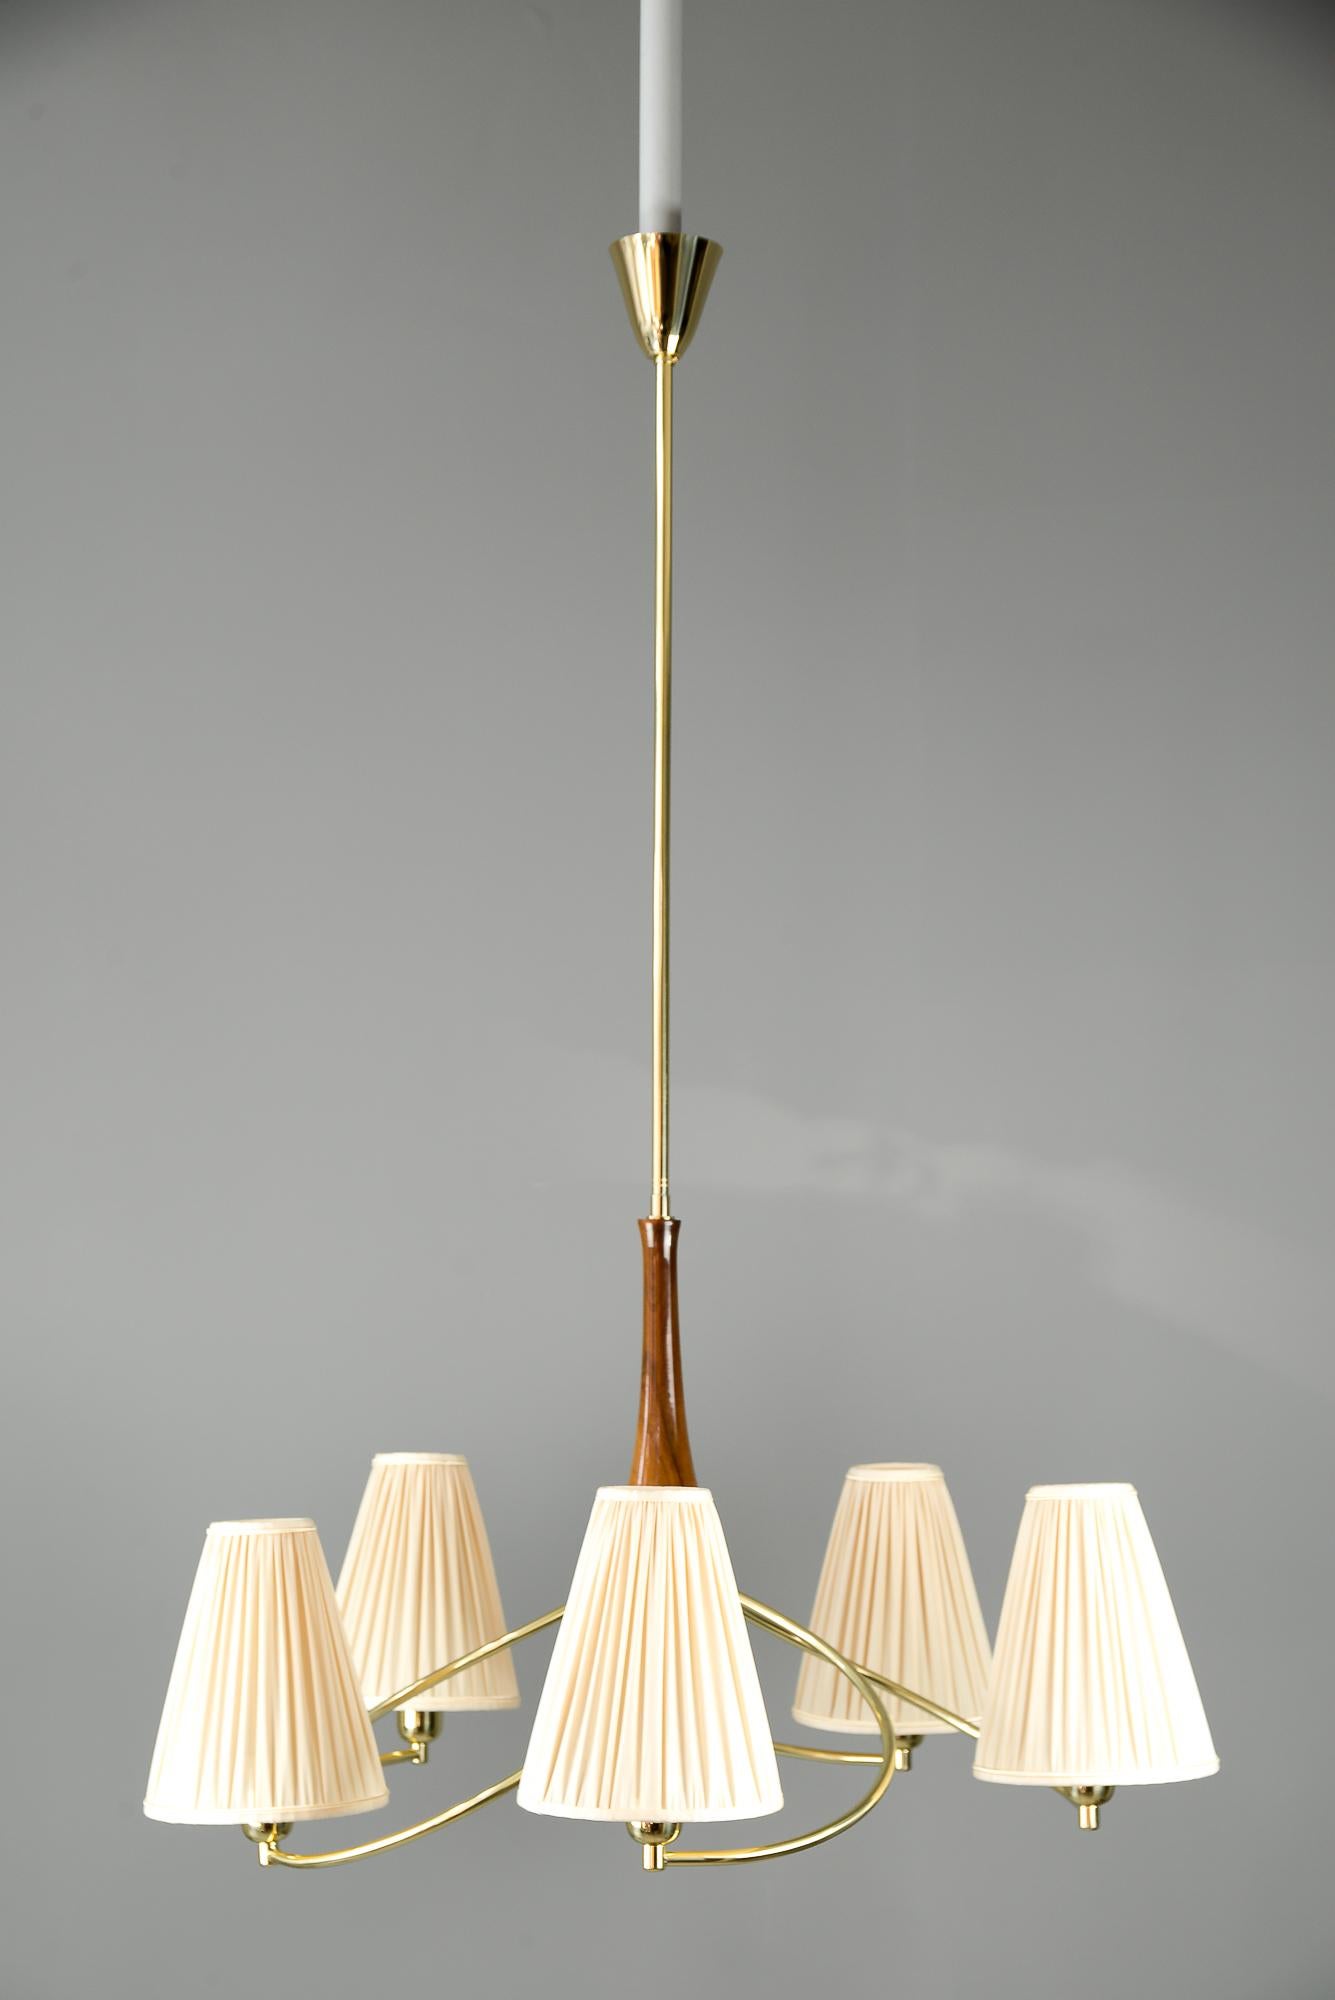 Rupert Nikoll chandelier with nut wood, circa 1950s
Polished and stove enameled
Shades are replaced (new).